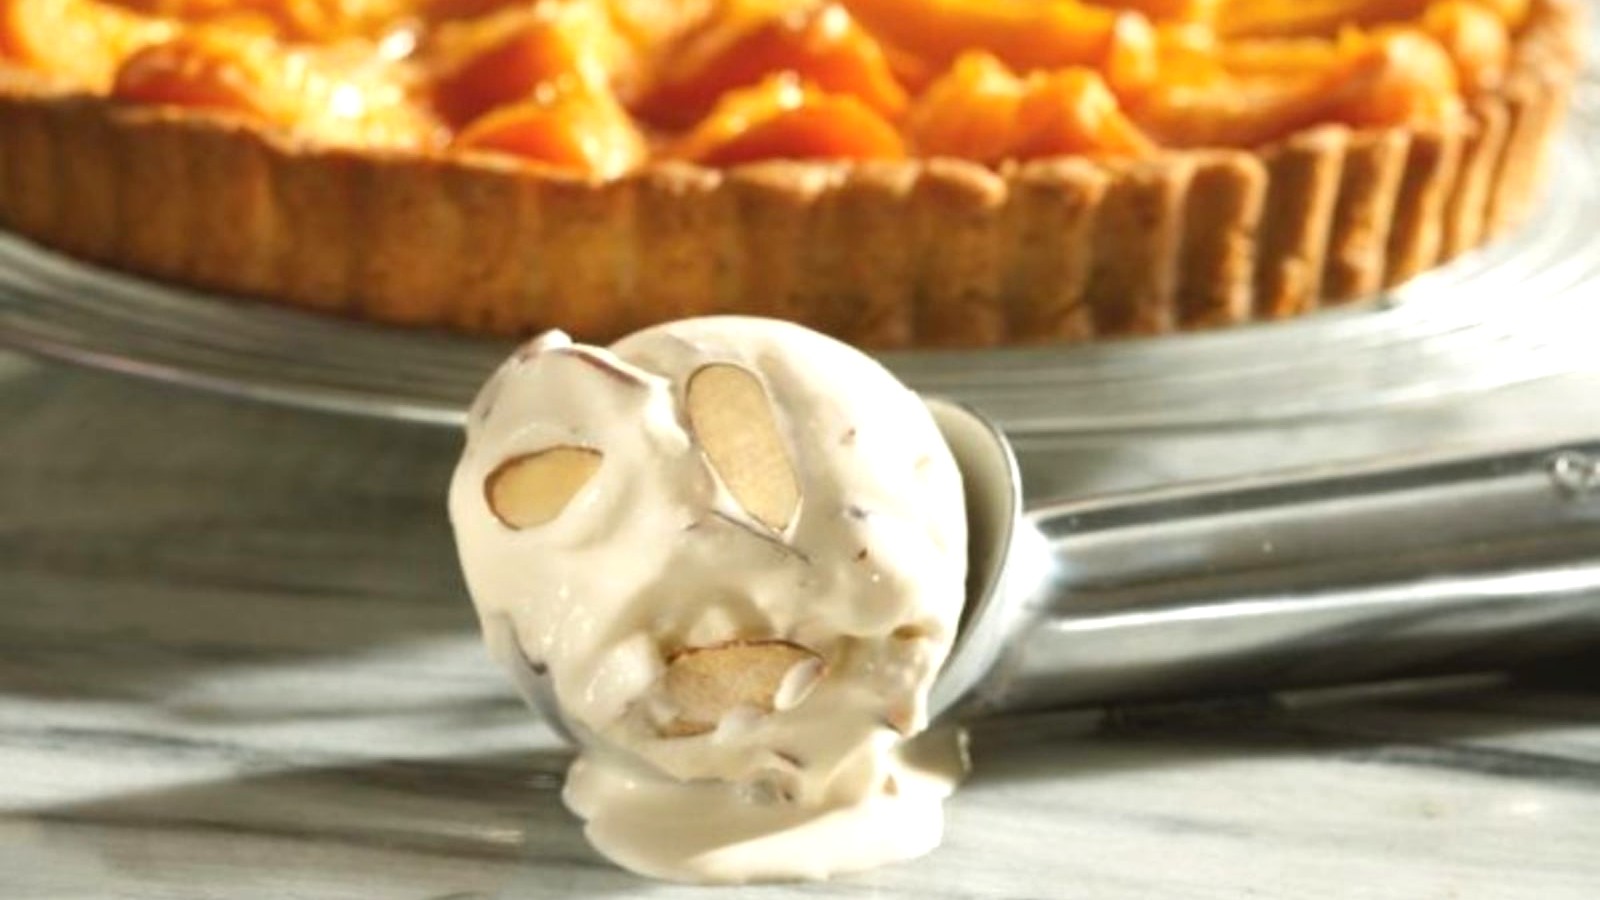 Image of Glorious Apricot Tart with Roasted Almond Ice Cream